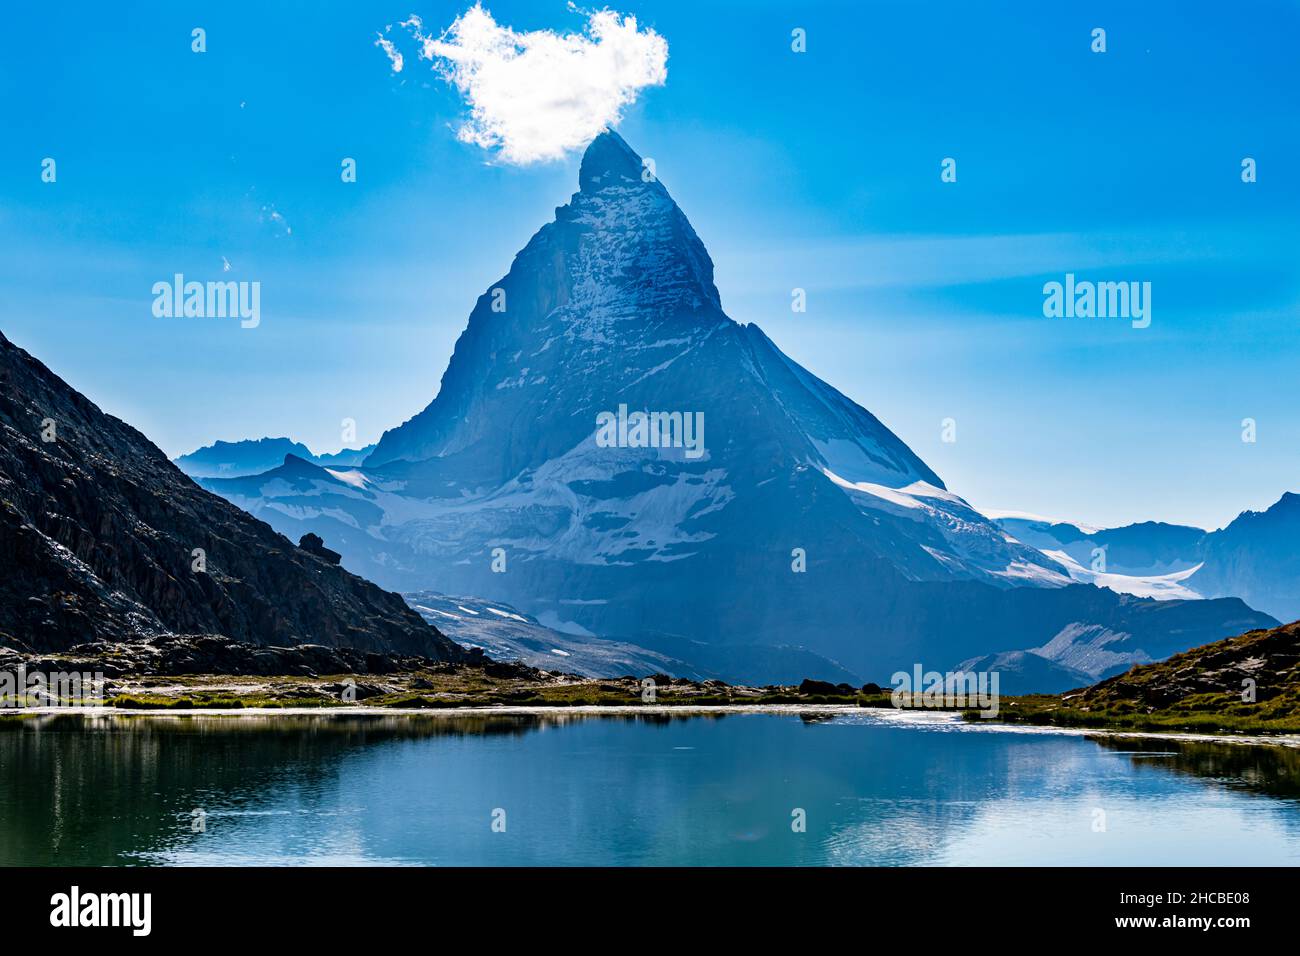 Alpine lake with Matterhorn mountain looming in background Stock Photo